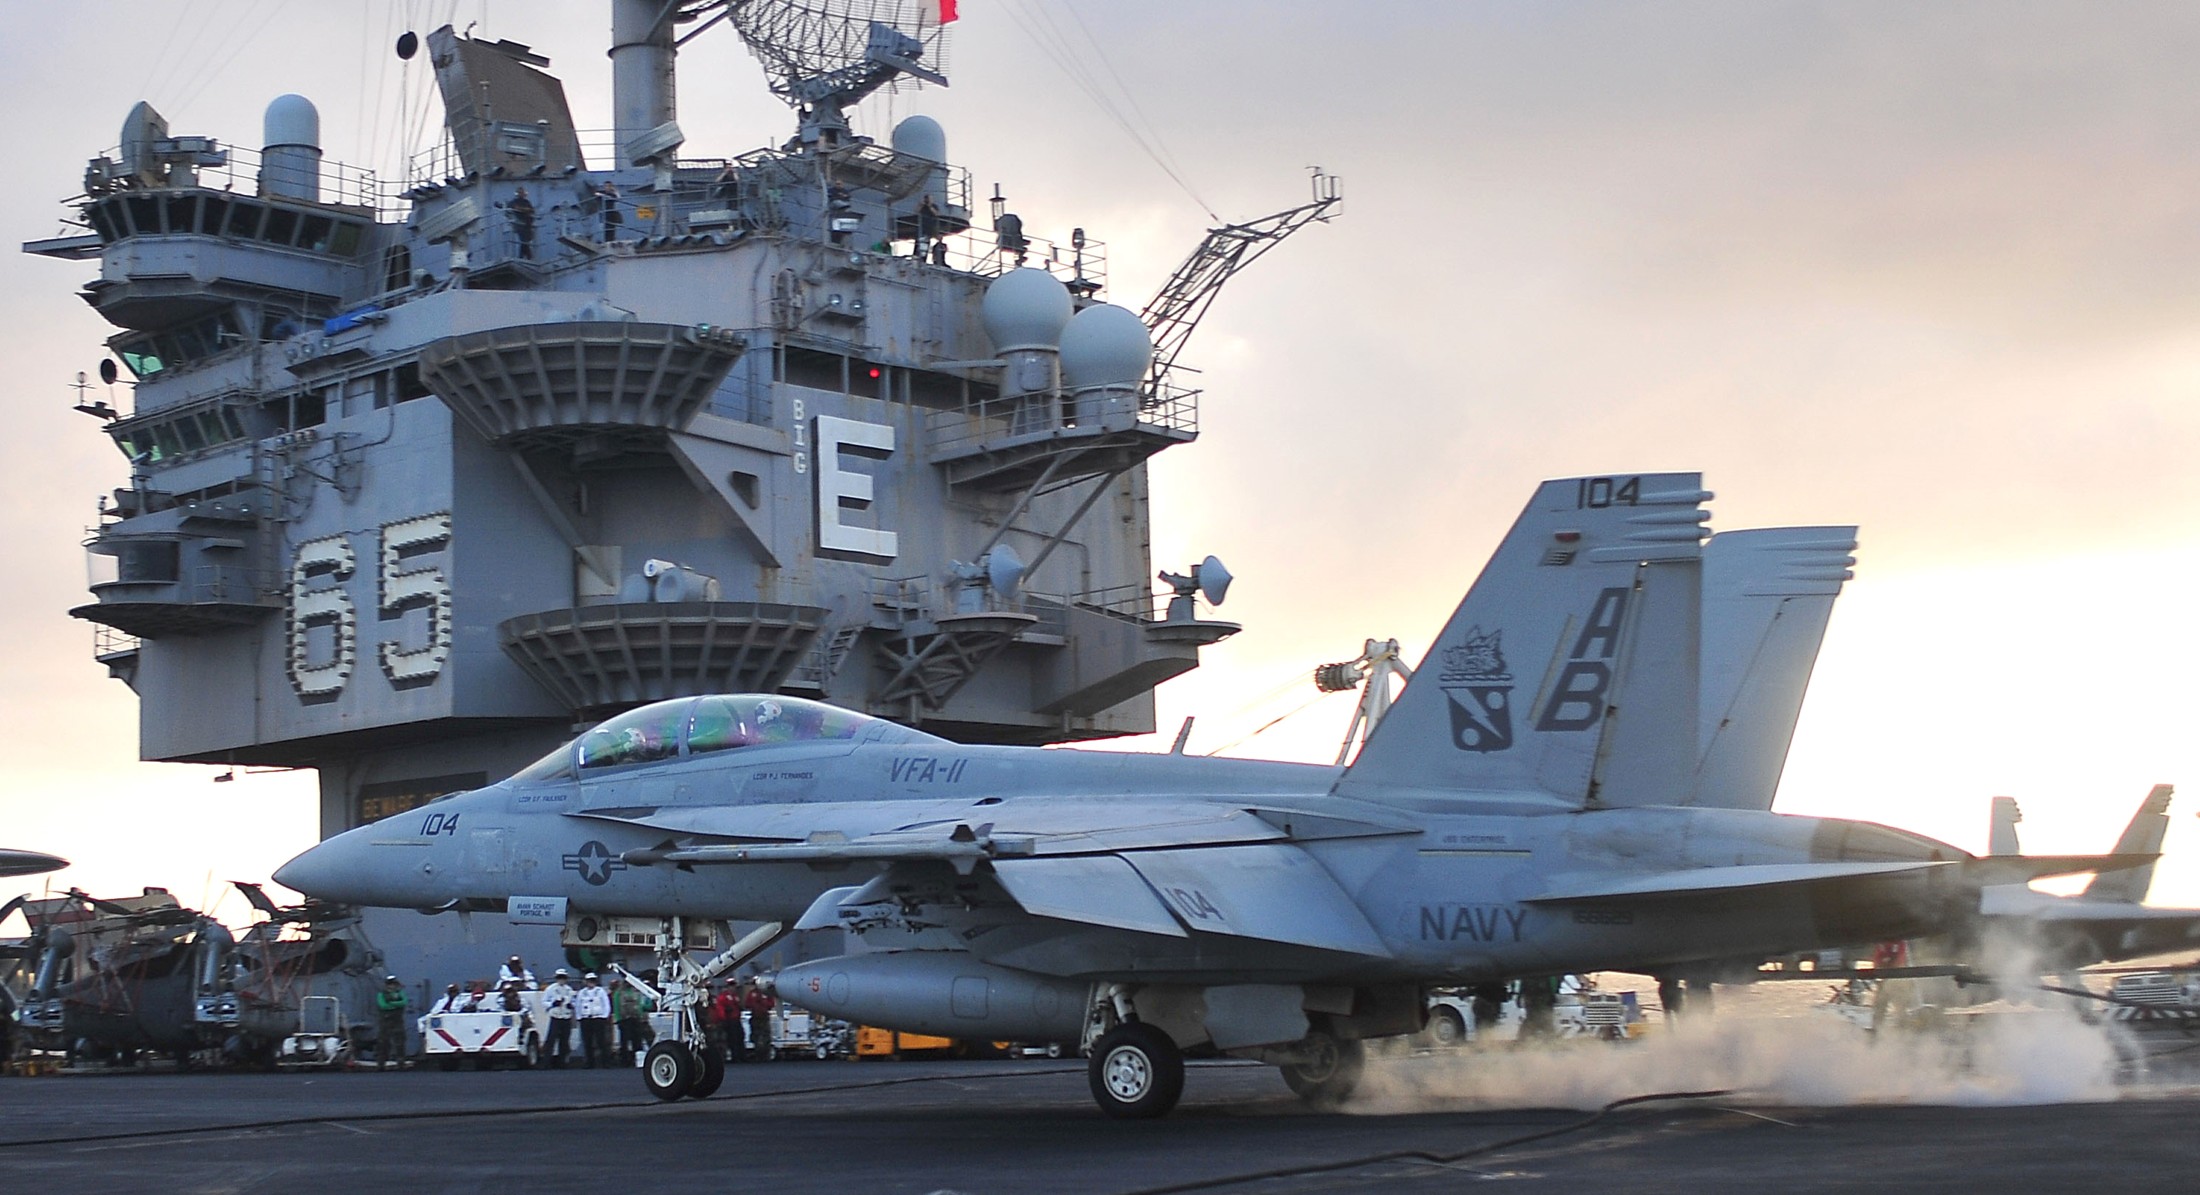 vfa-11 red rippers strike fighter squadron us navy f/a-18f super hornet carrier air wing cvw-1 uss enterprise cvn-65 40